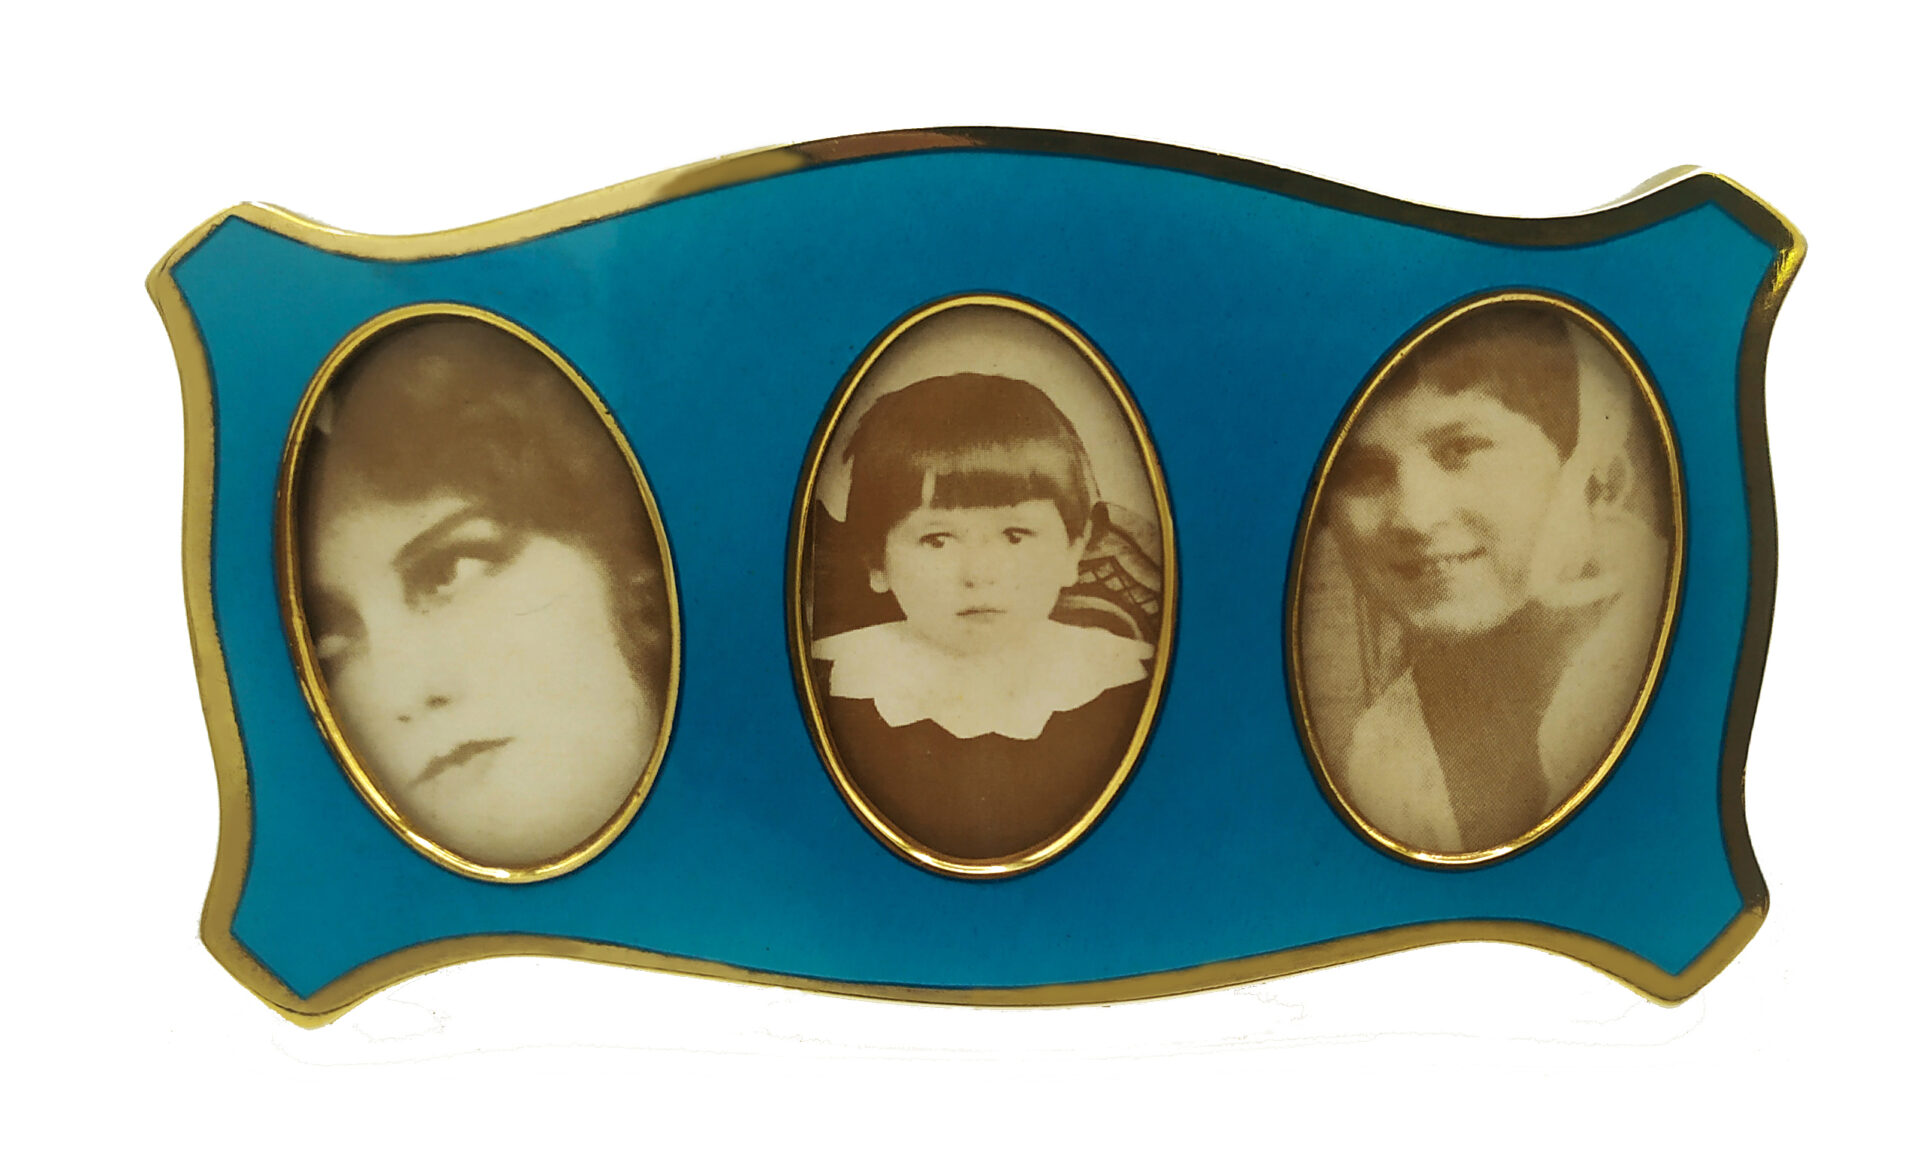 Shaped frame for 3 photographs in 925/1000 sterling silver gold plated with translucent fired enamels on guillochè. Modern Baroque style. Blue velvet panel. External measures cm. 5.5 x 10.2 with 3 oval interiors cm. 2.3 x 3.5. Weight gr. 52. Produced in Florence at the Salimbeni company headquarters in 1965 with manual workmanship by skilled artisan artists.